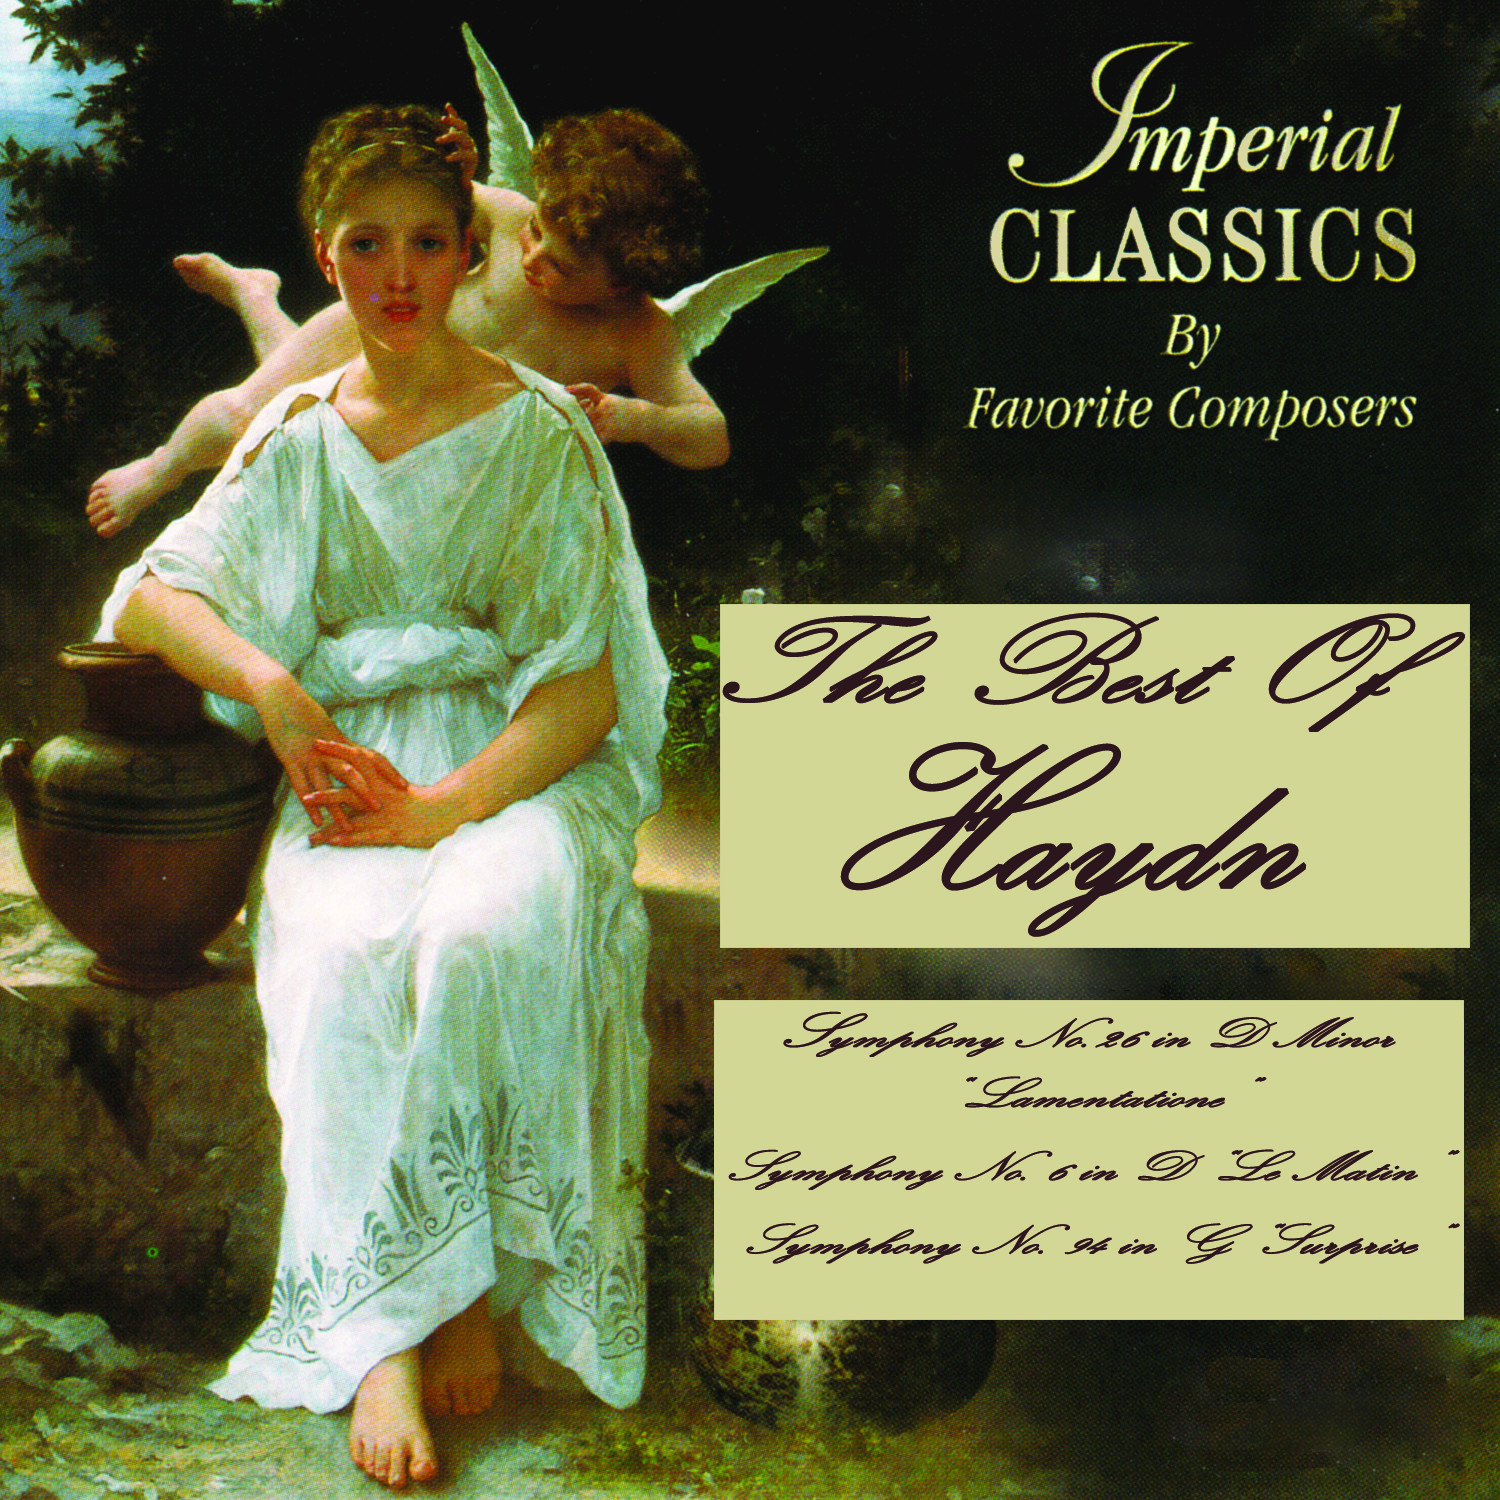 Imperial Classics: The Best of Haydn